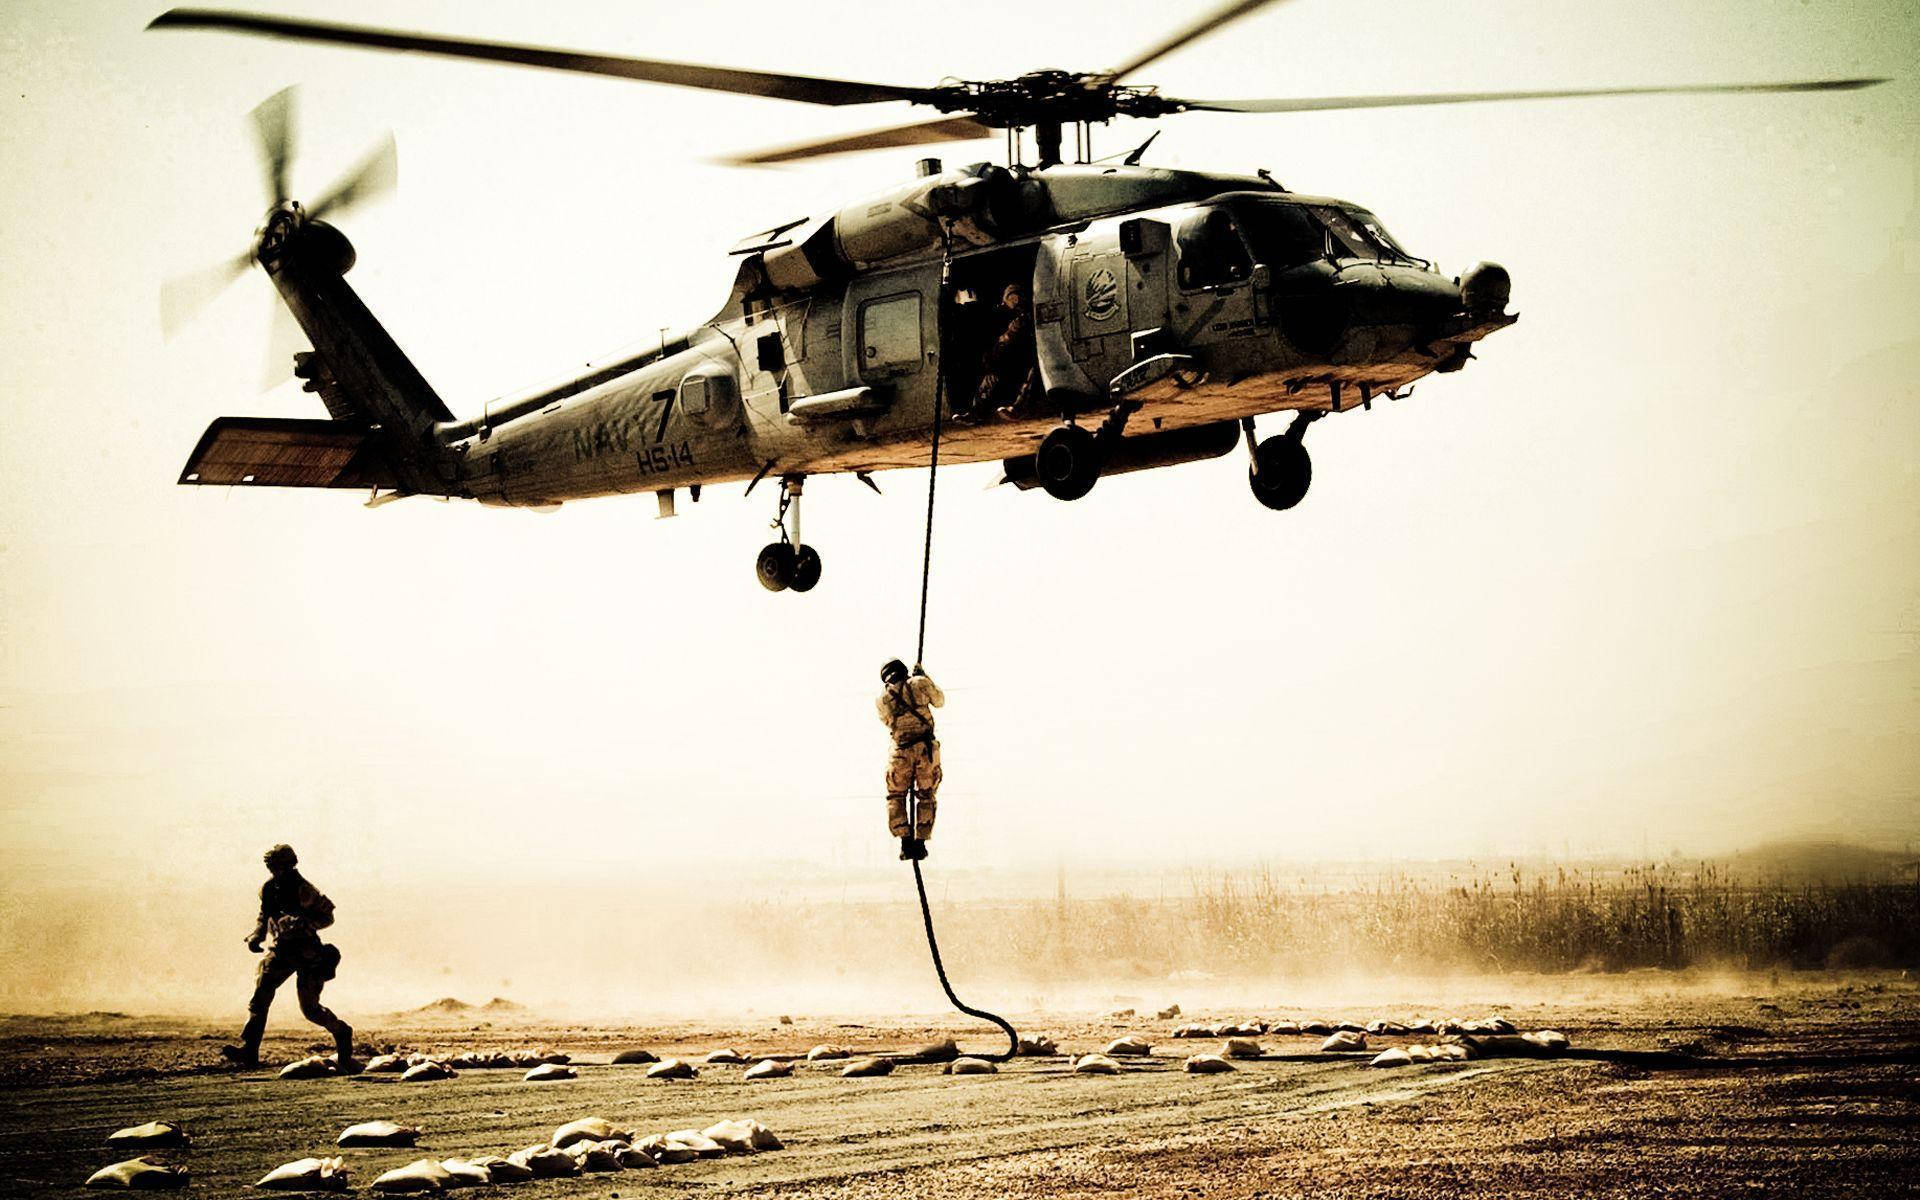 A Black Hawk helicopter soars through the sky Wallpaper